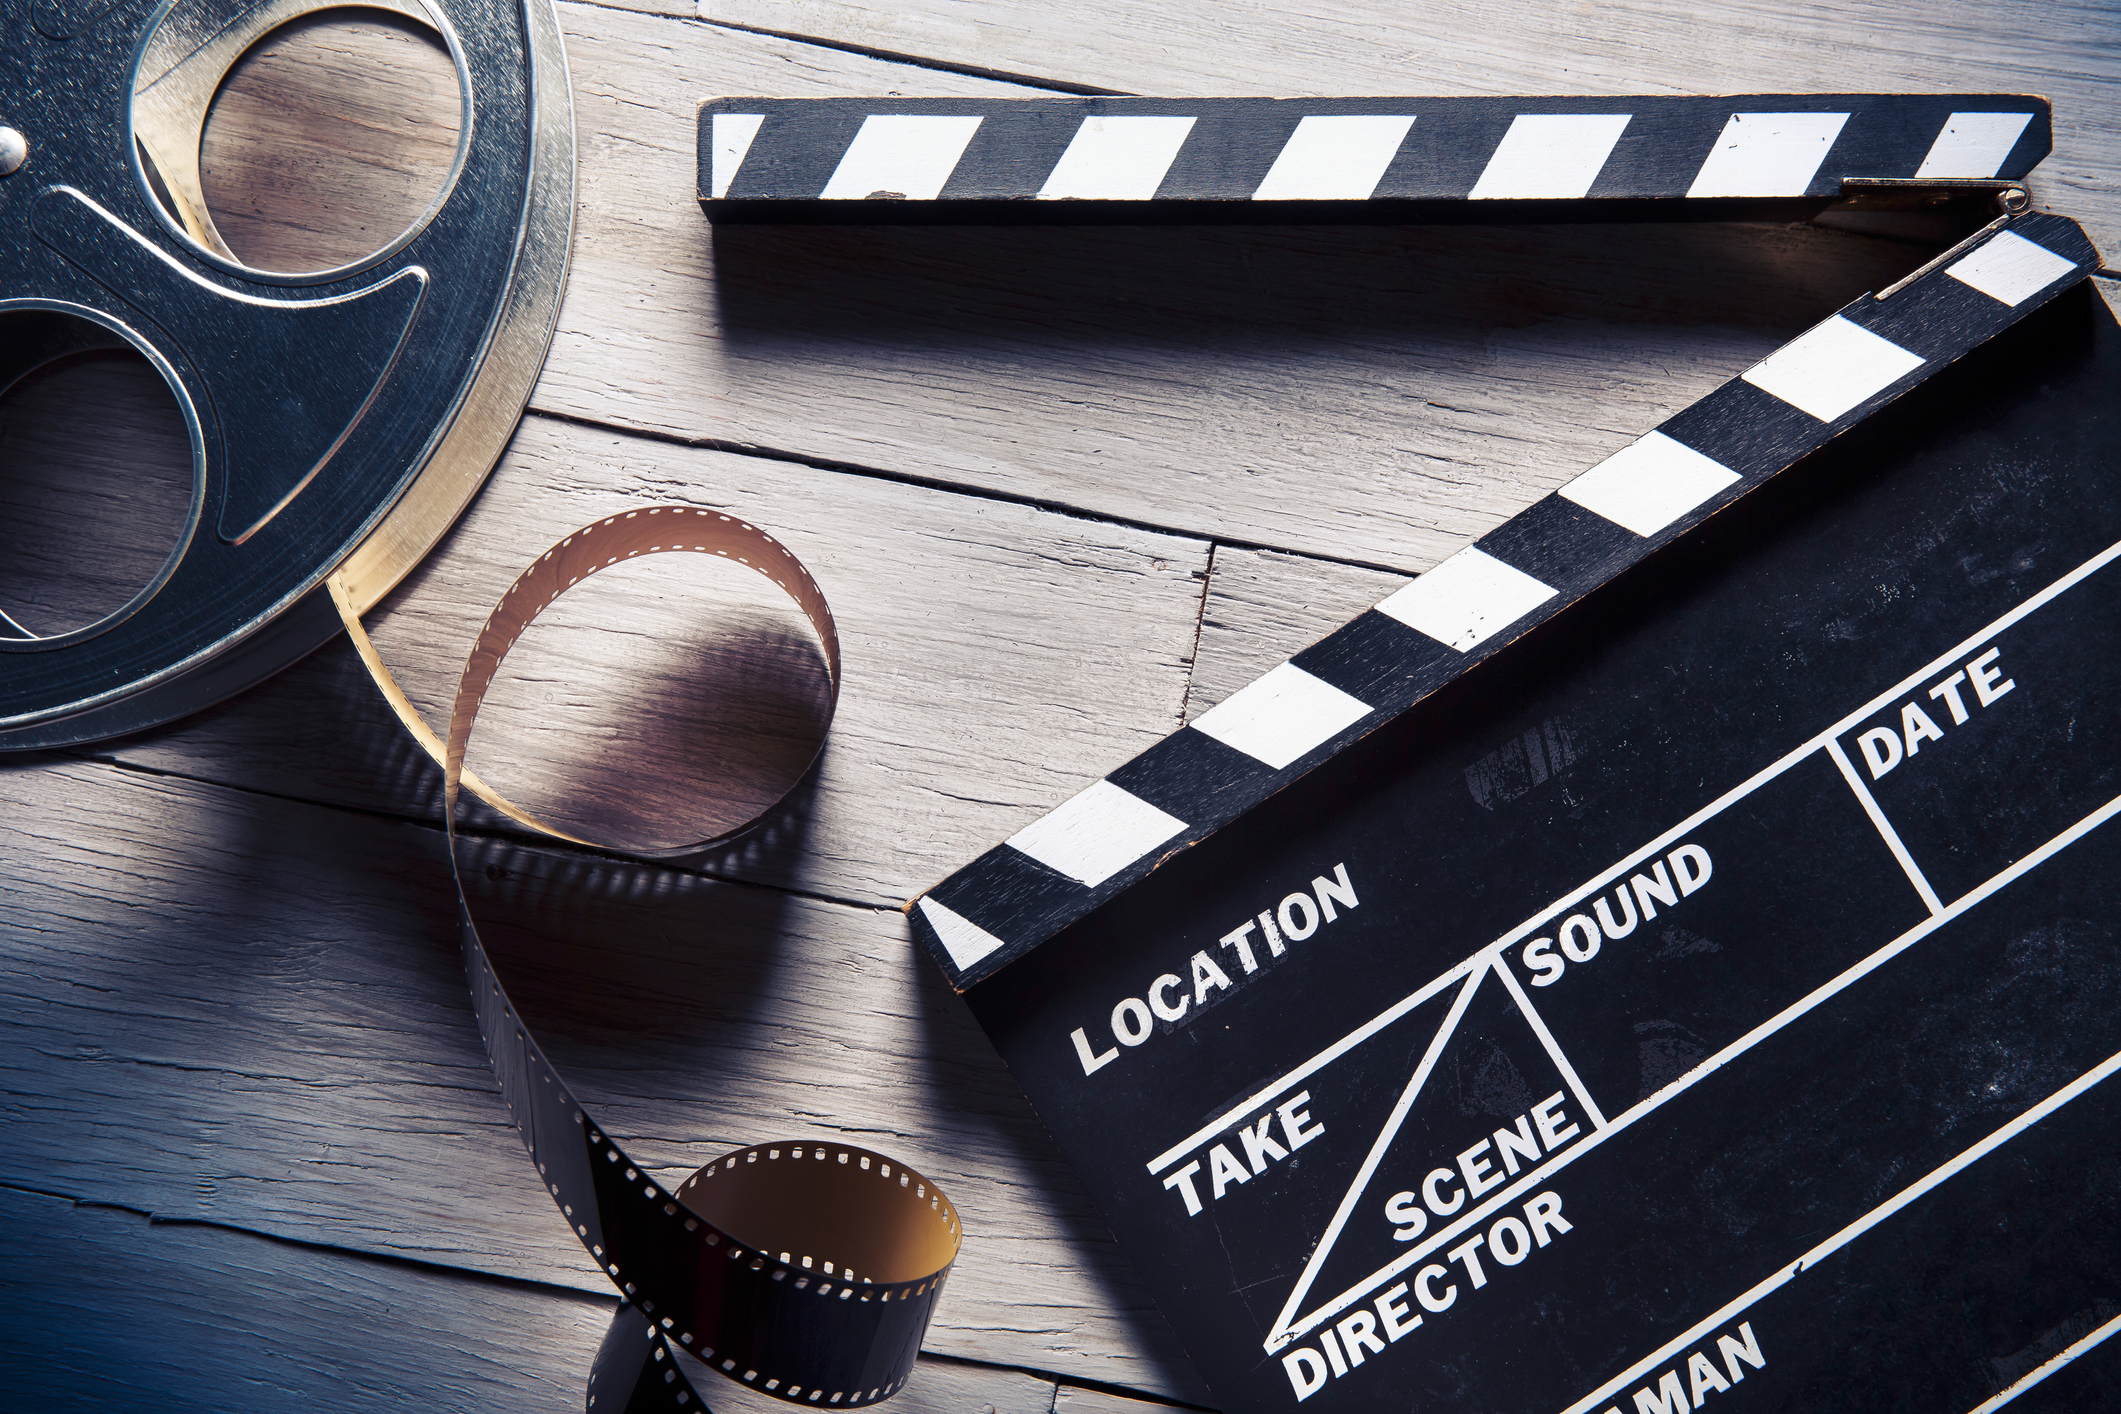 Film reel and movie clapper on wooden background